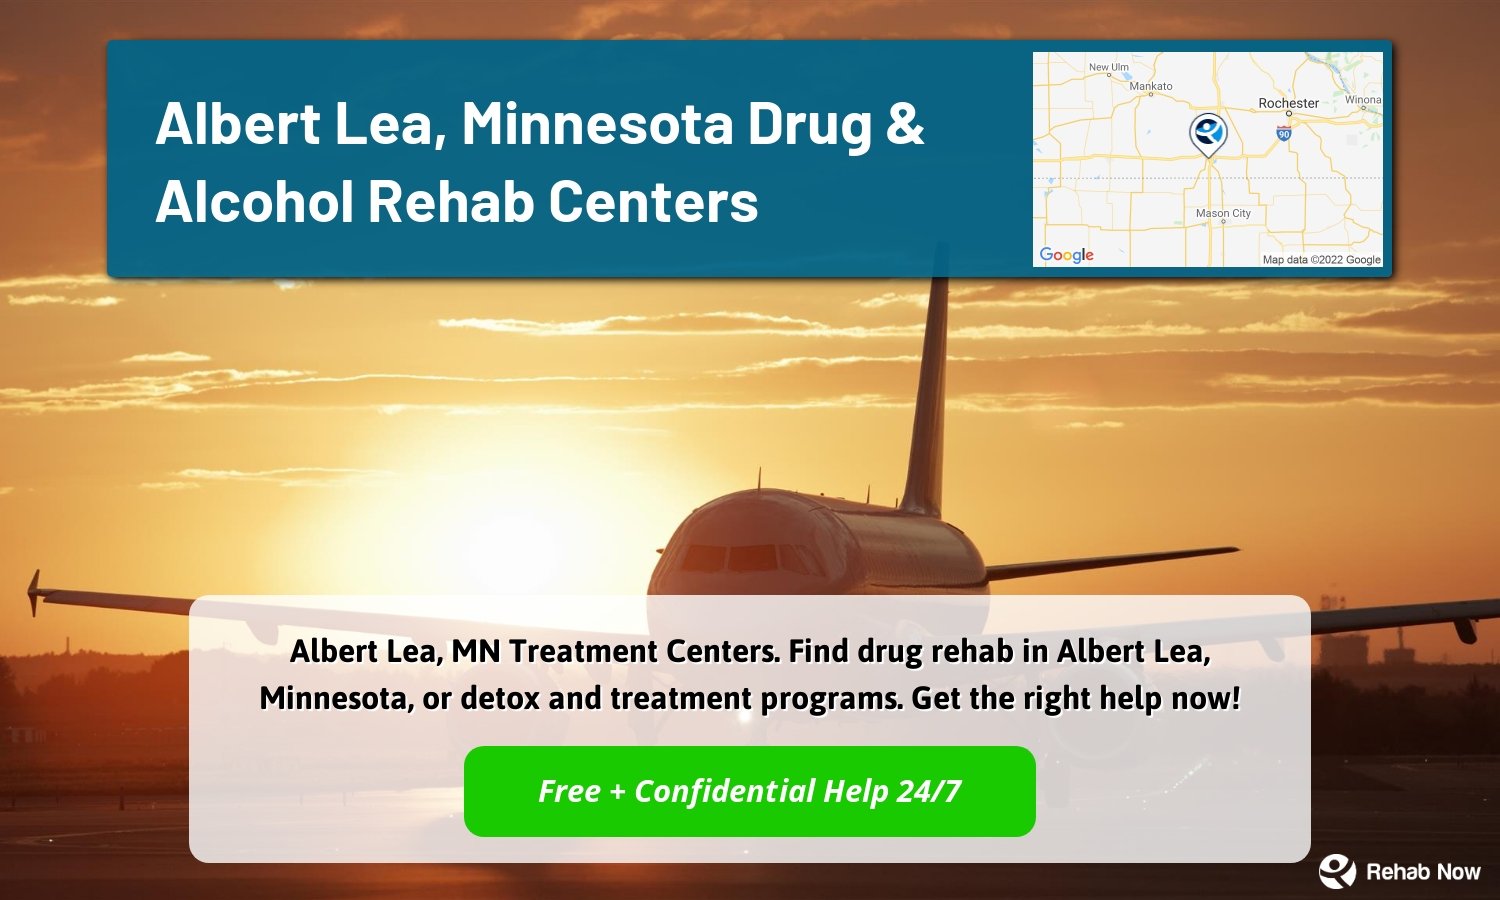 Albert Lea, MN Treatment Centers. Find drug rehab in Albert Lea, Minnesota, or detox and treatment programs. Get the right help now!